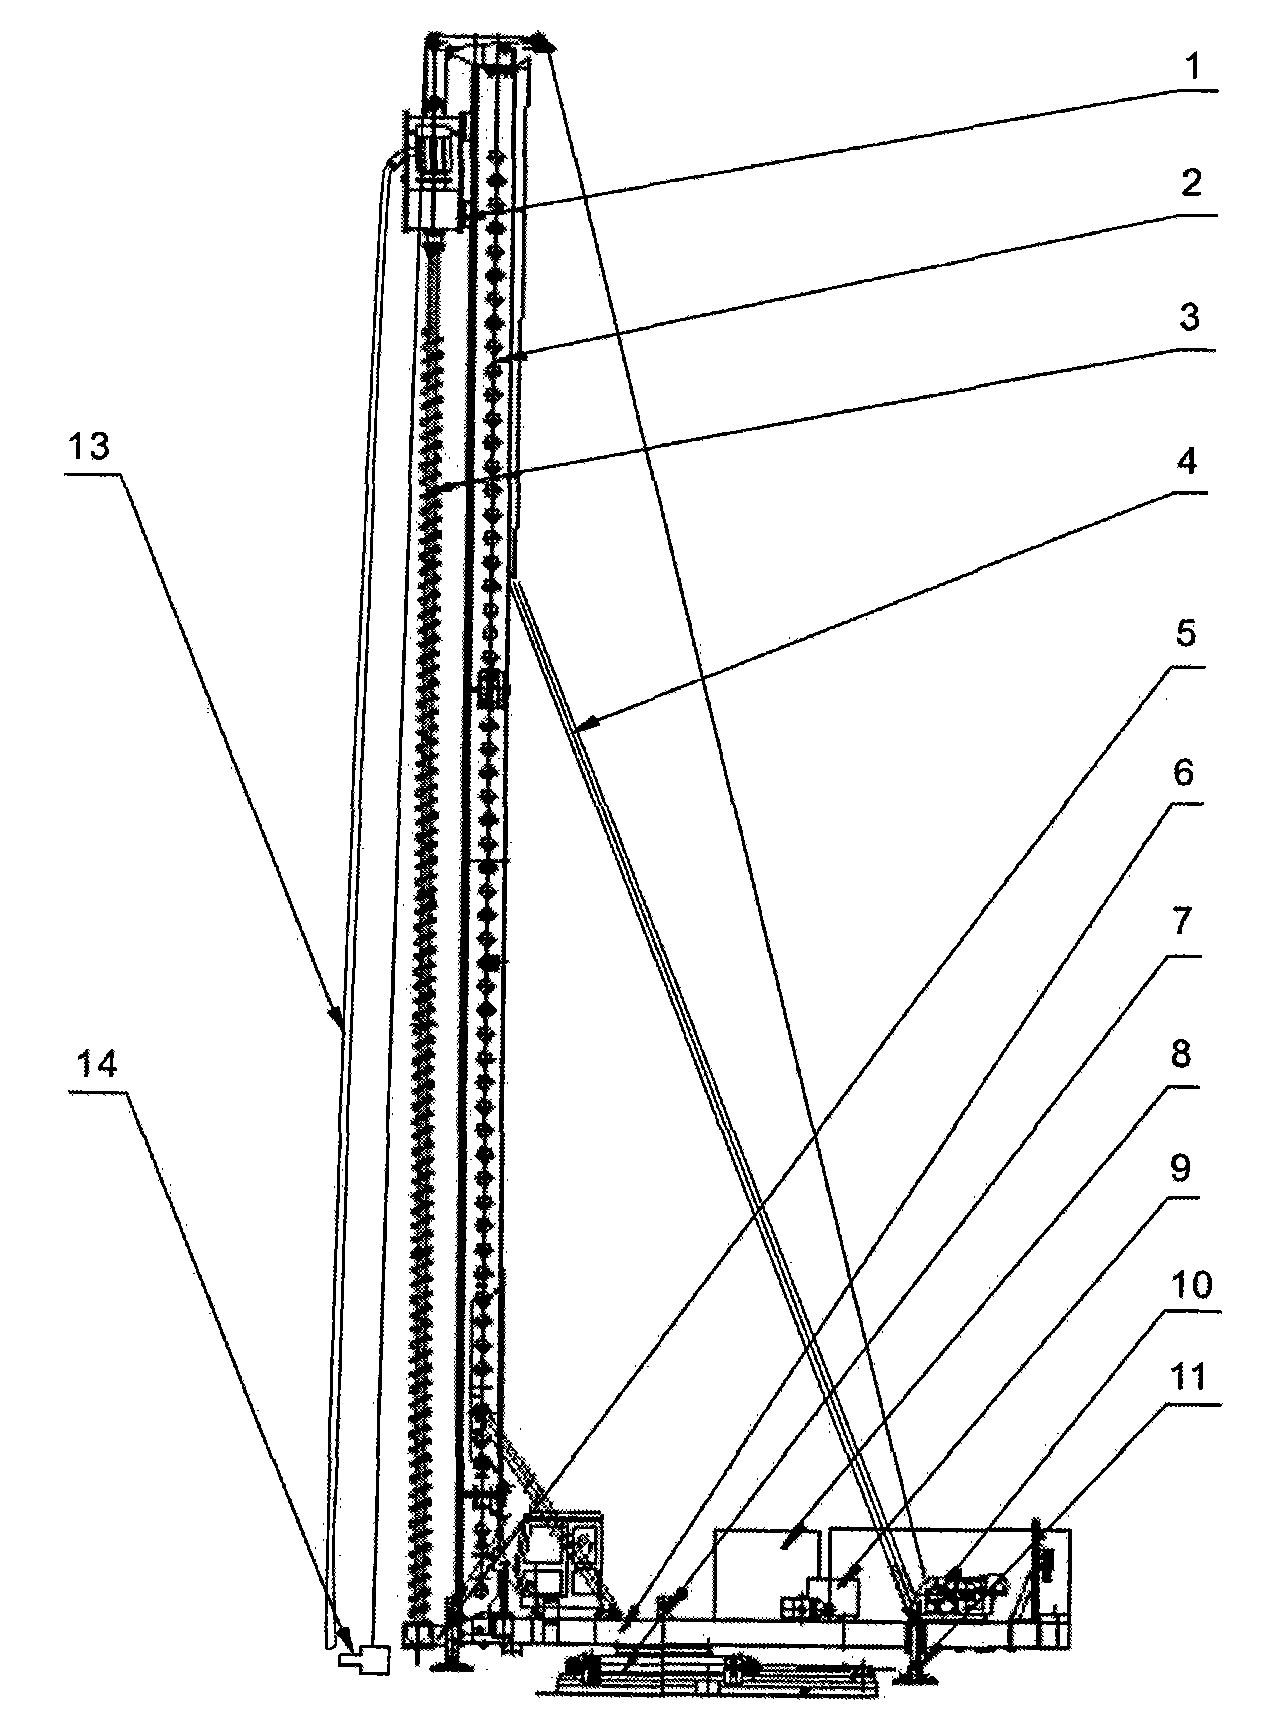 Construction method for anti-floating anchor rod and special long auger